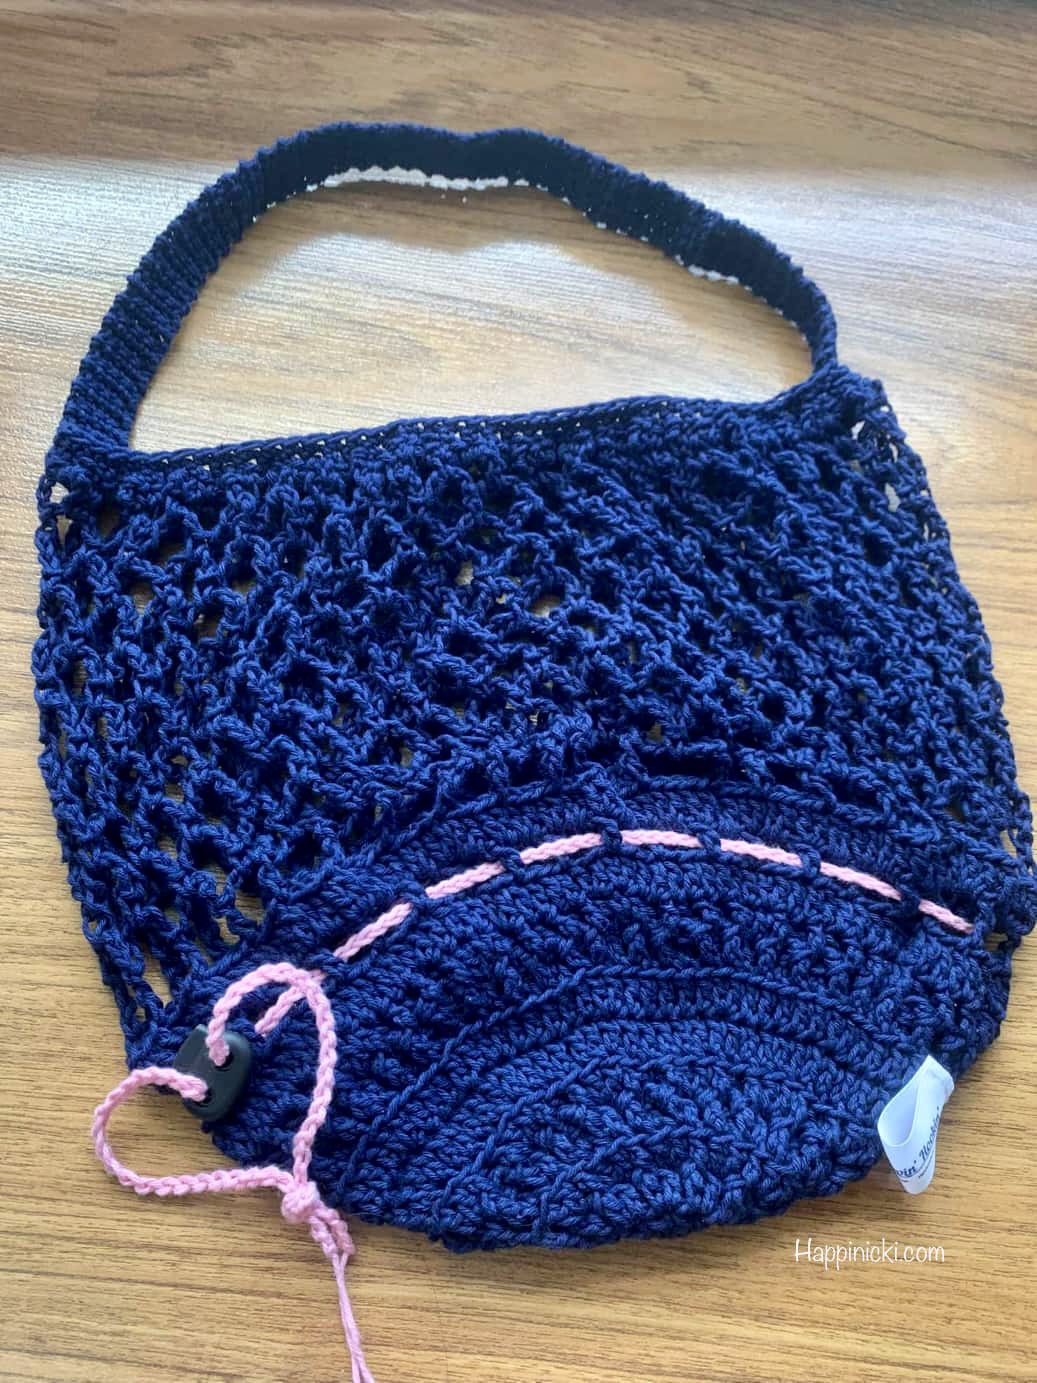 Crochet Travel Bag - Free Pattern - off the hook for you